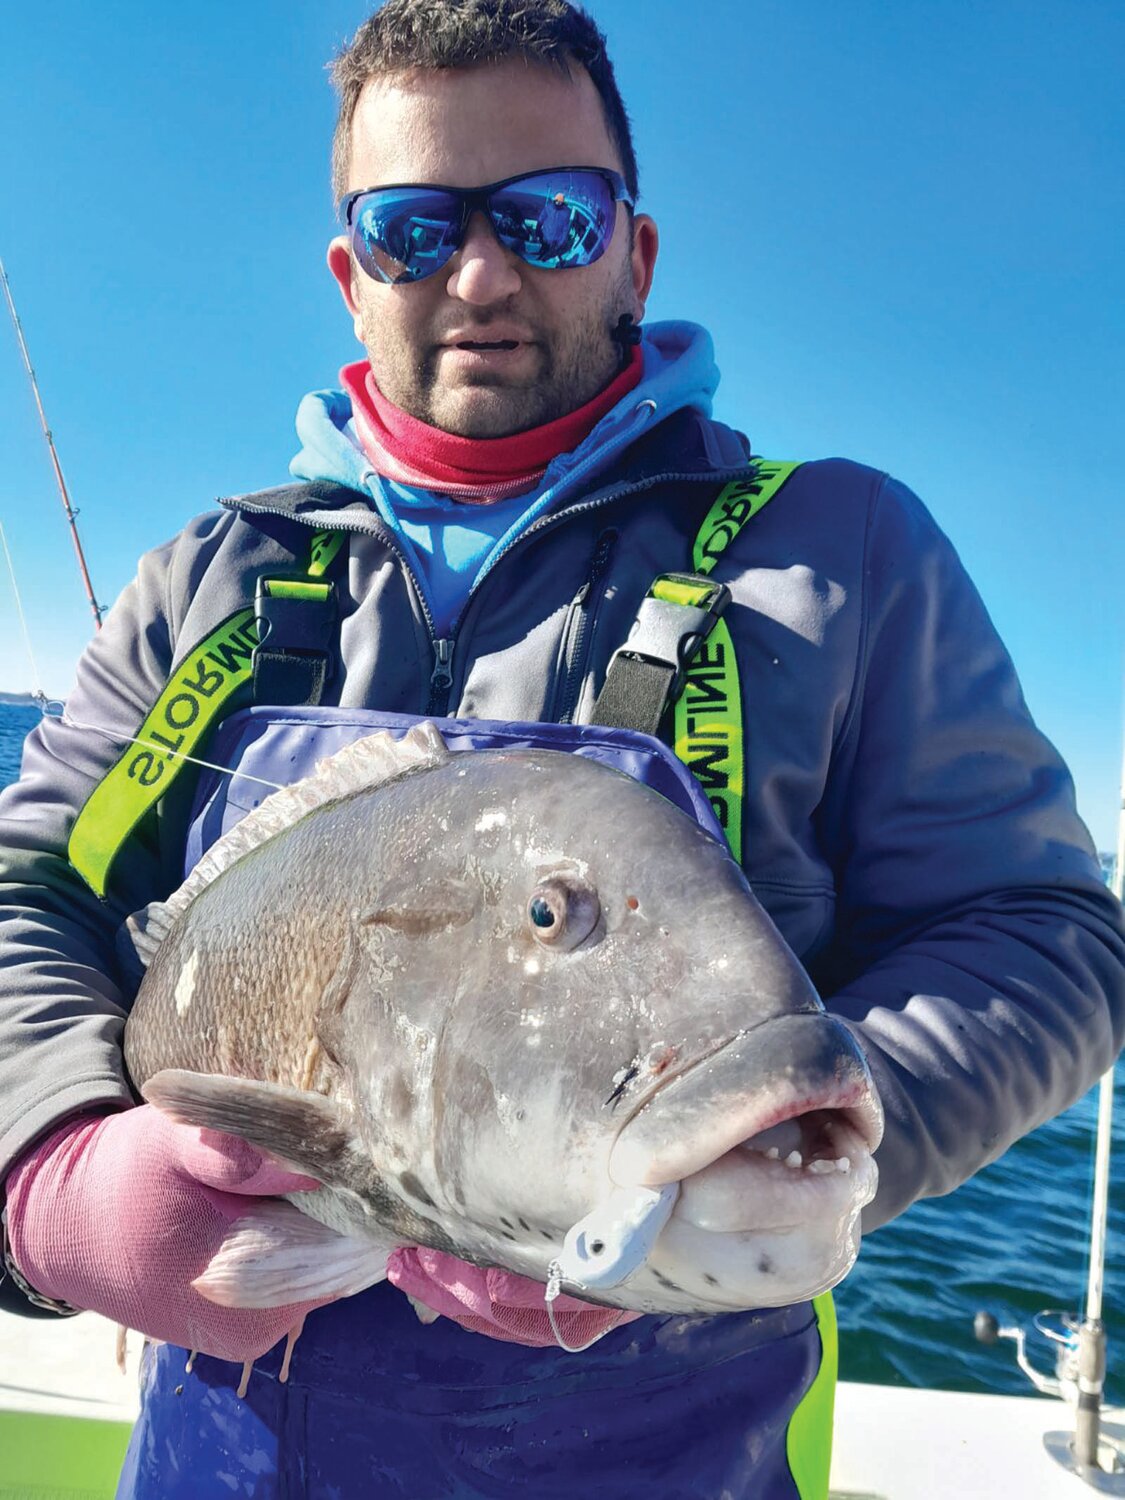 BIG TAUTOG BITE: “Capt. Kurt Rivard of K & M Coastal Charters caught this 14 pound tautog last week with a jig when fishing off Newport,” said Jeff Sullivan of Lucky Bait & Tackle, Warren.  (Submitted photo)